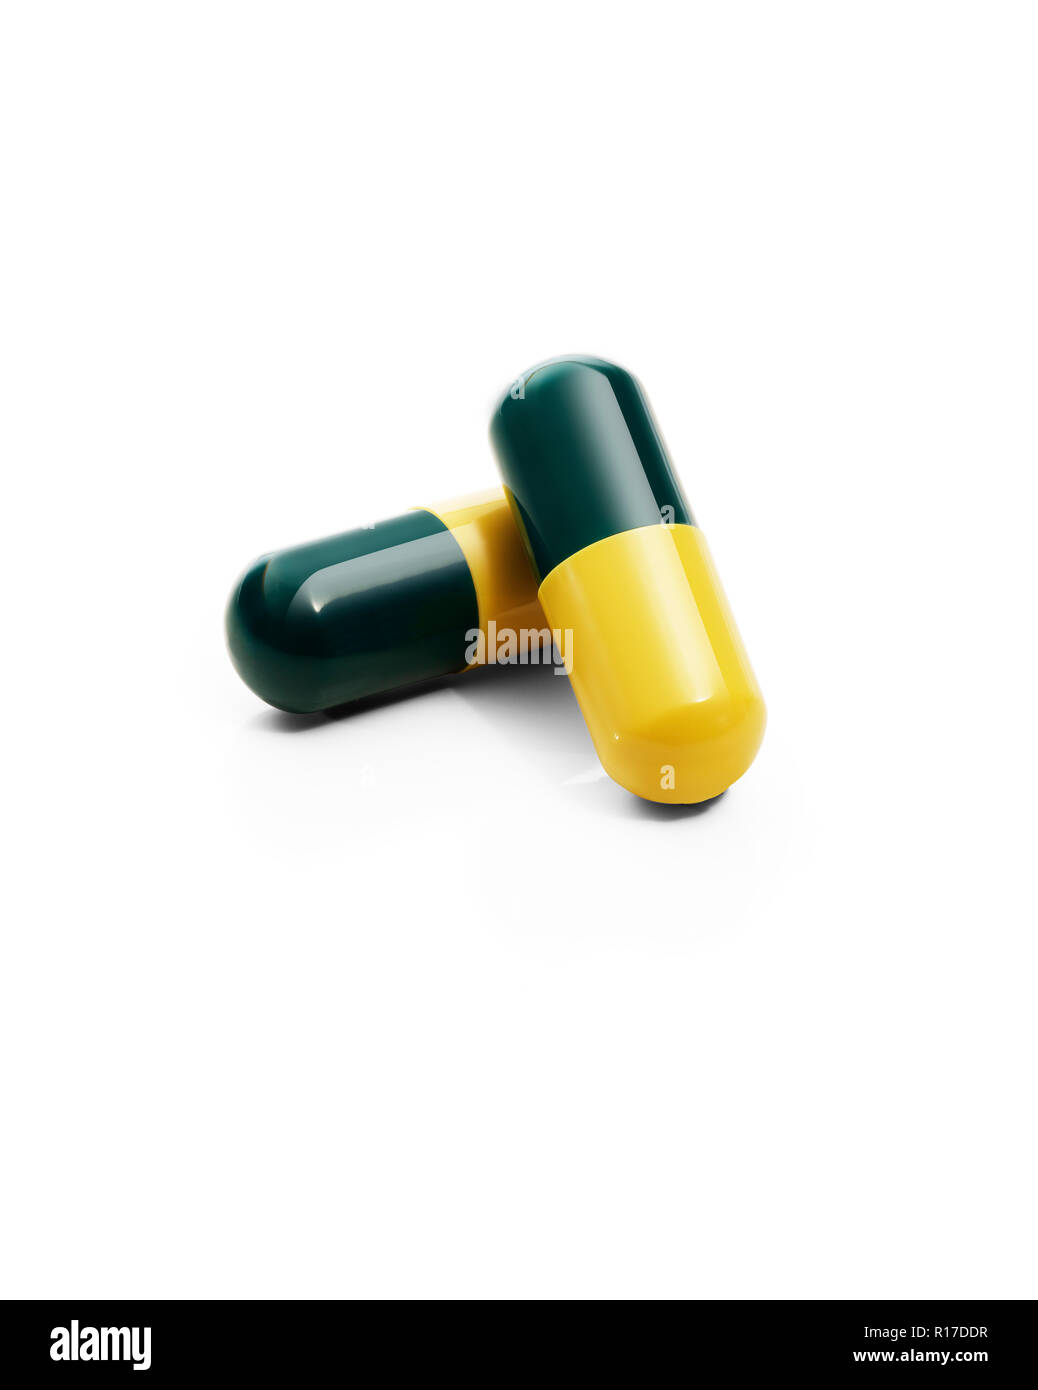 Two dark green and yellow medication pill capsules, still life Stock Photo